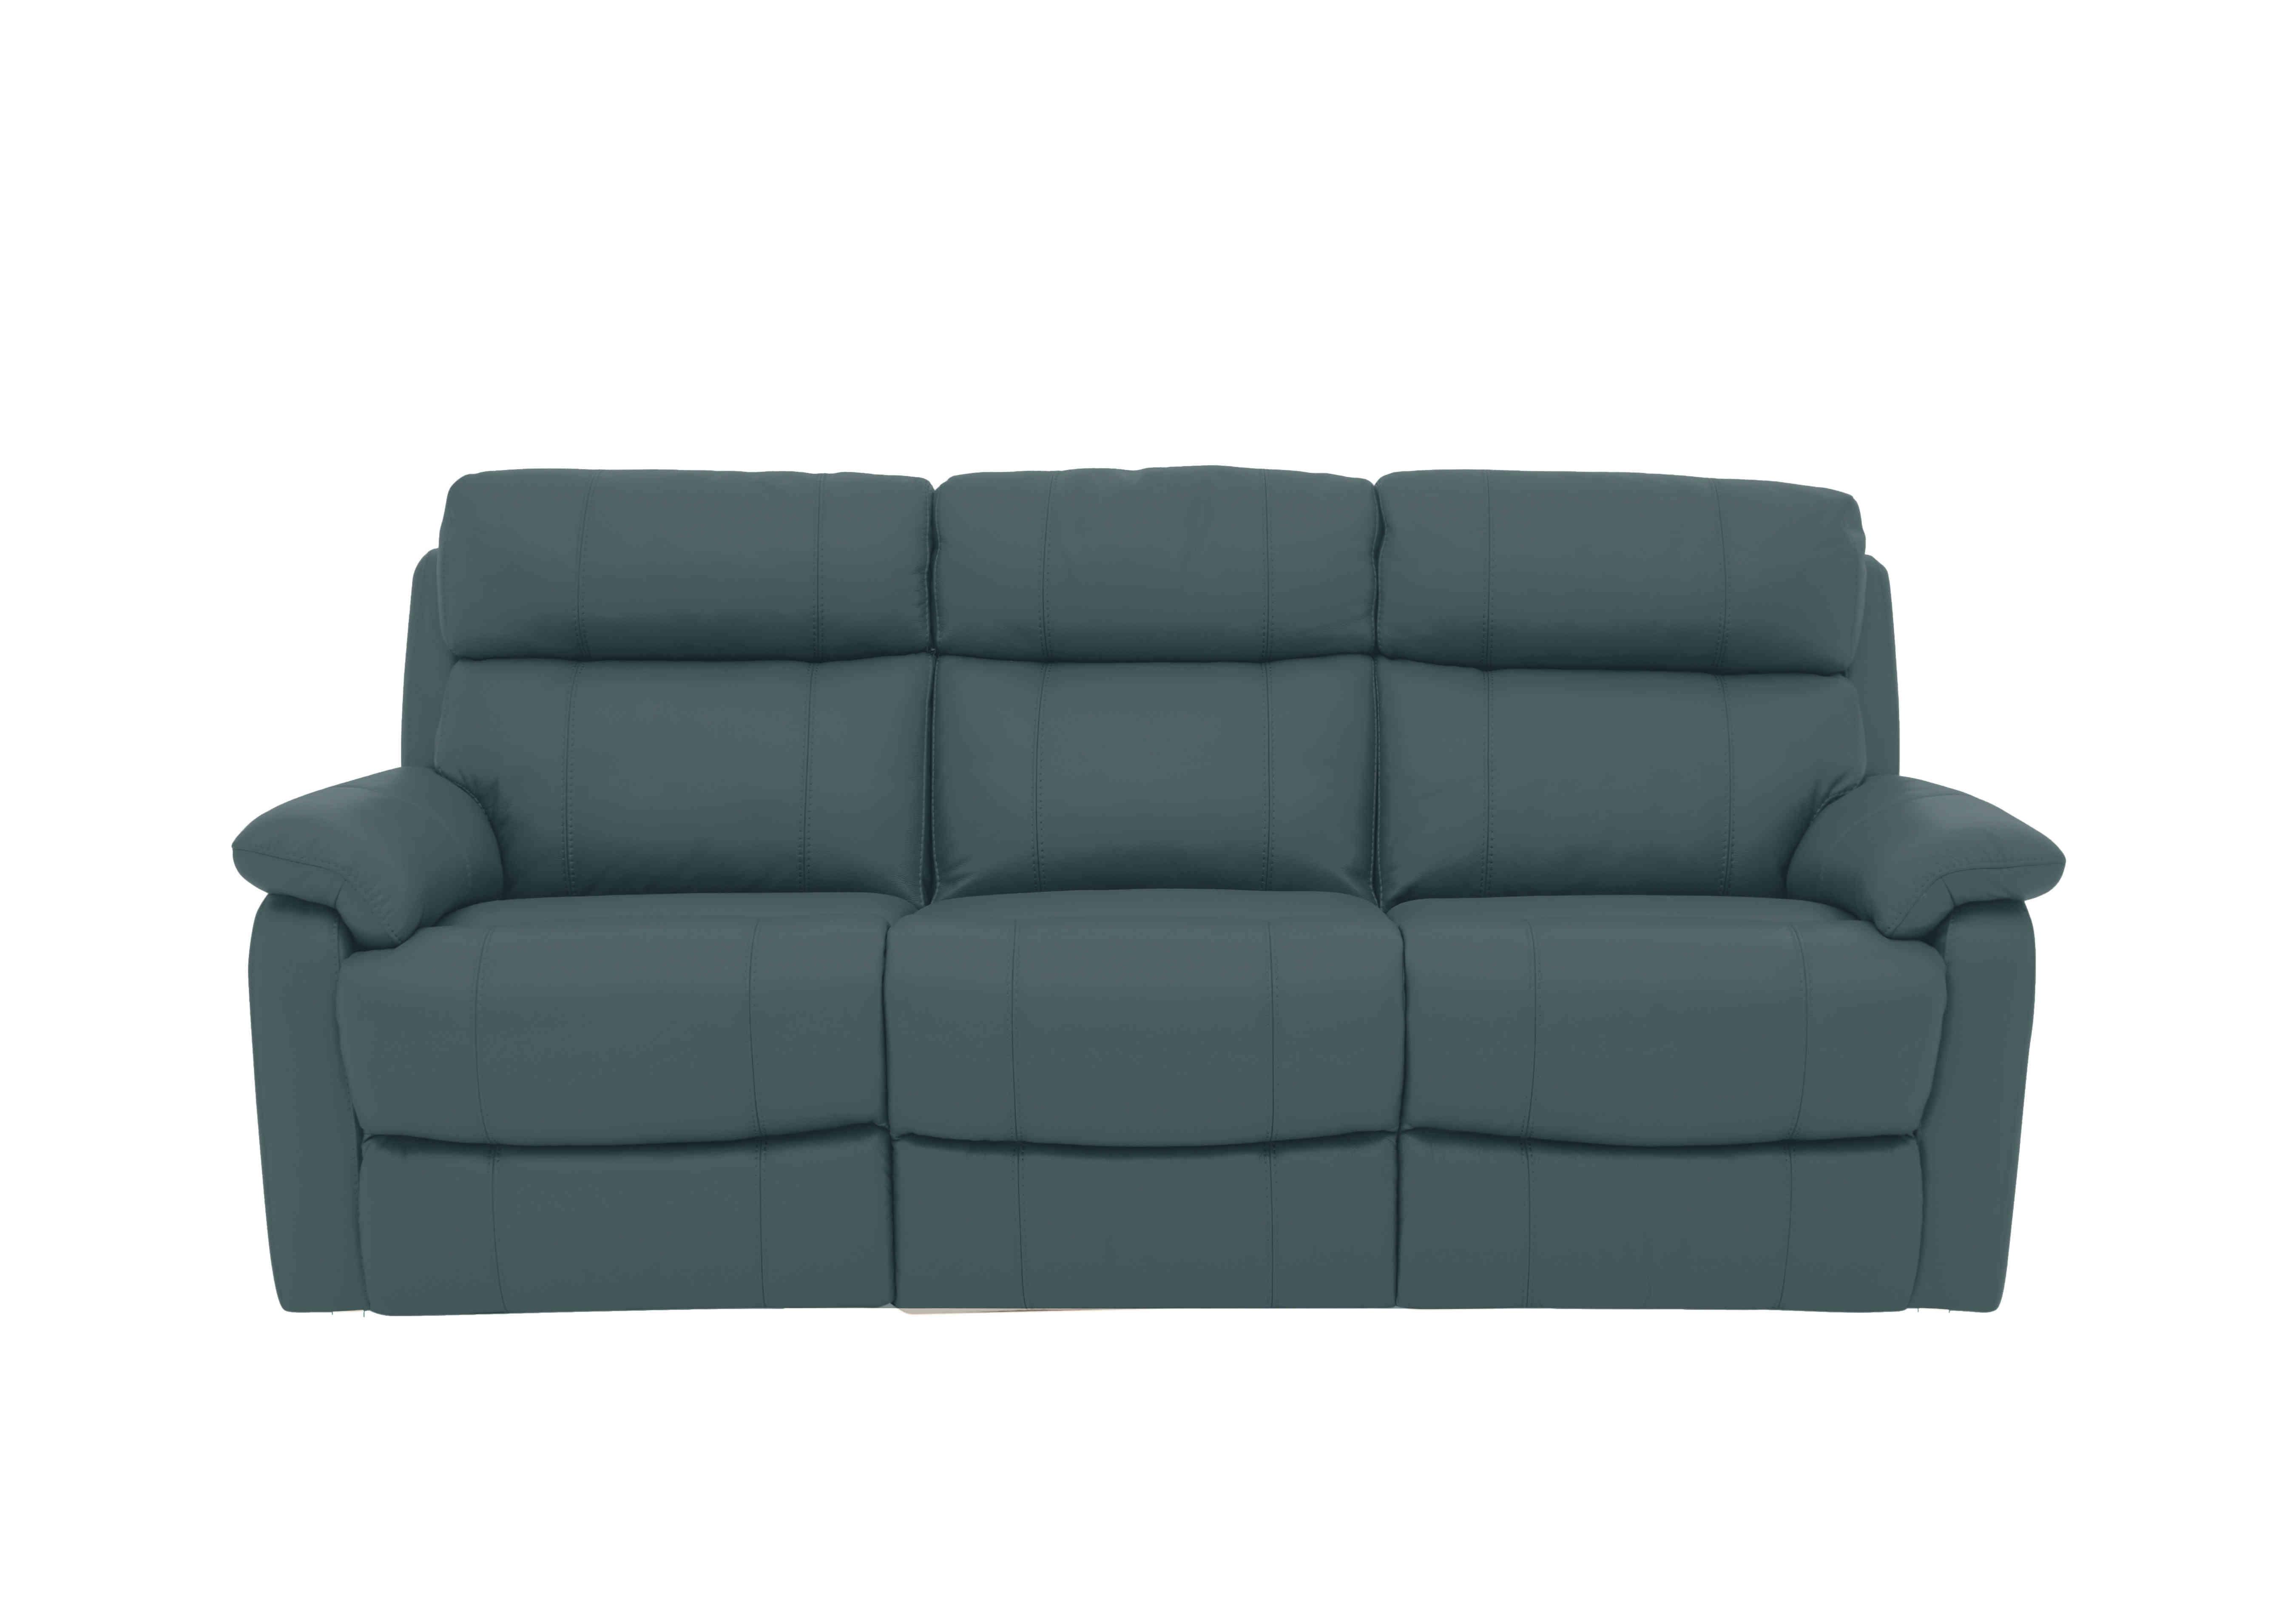 Relax Station Komodo 3 Seater Power Leather Sofa in Bv-301e Lake Green on Furniture Village